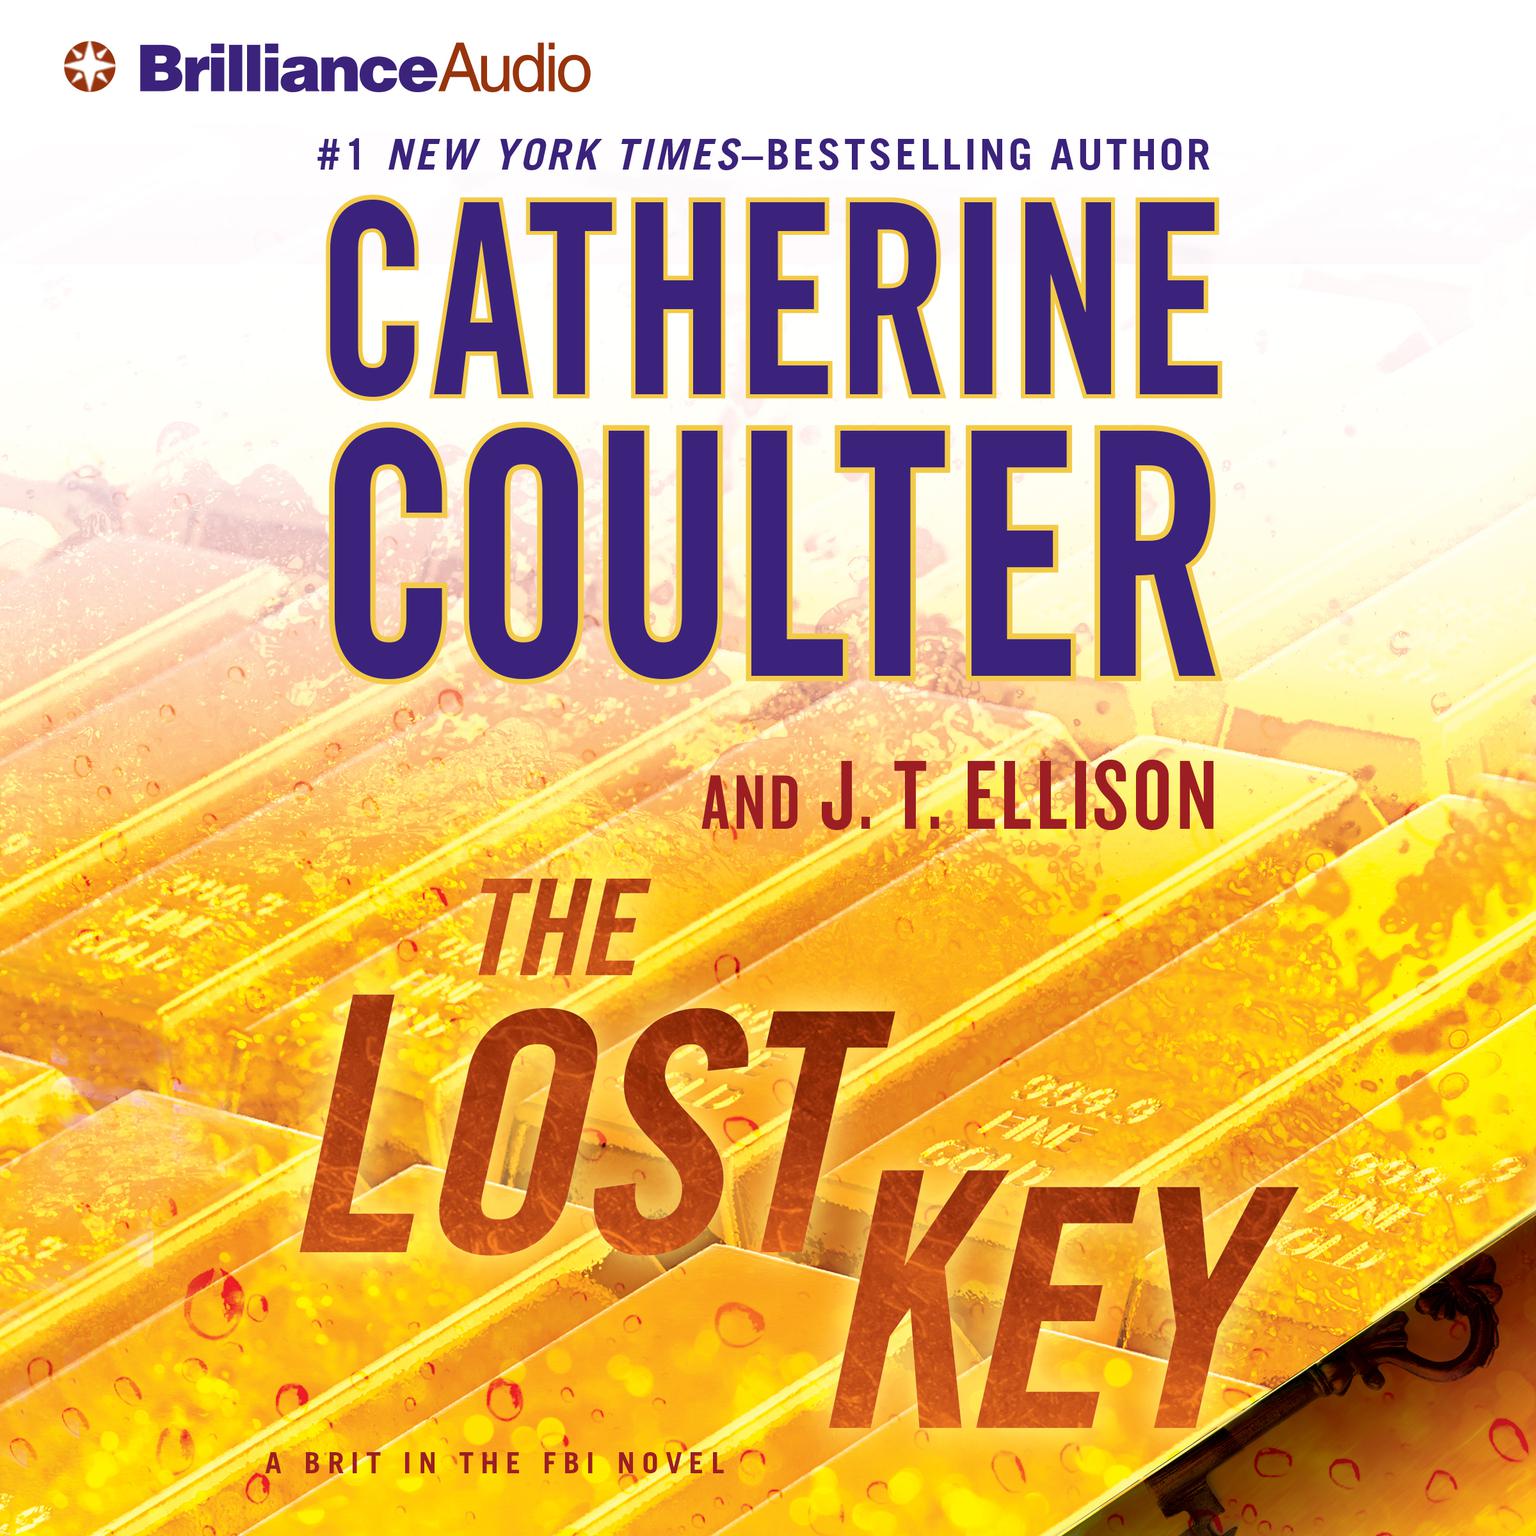 The Lost Key (Abridged): A Brit in the FBI Novel Audiobook, by Catherine Coulter